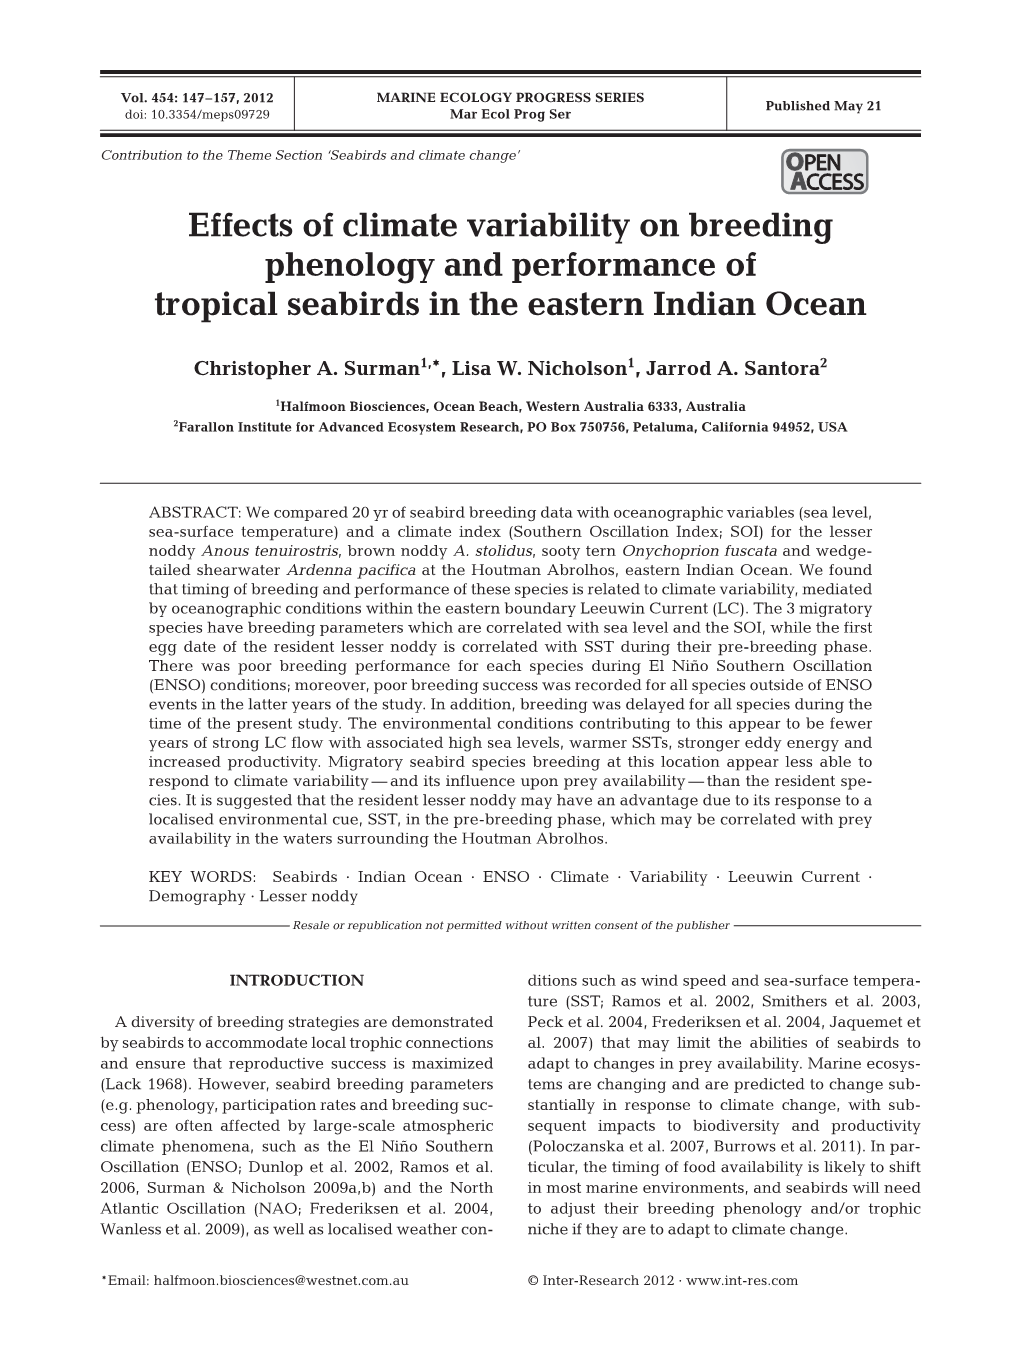 Effects of Climate Variability on Breeding Phenology and Performance of Tropical Seabirds in the Eastern Indian Ocean